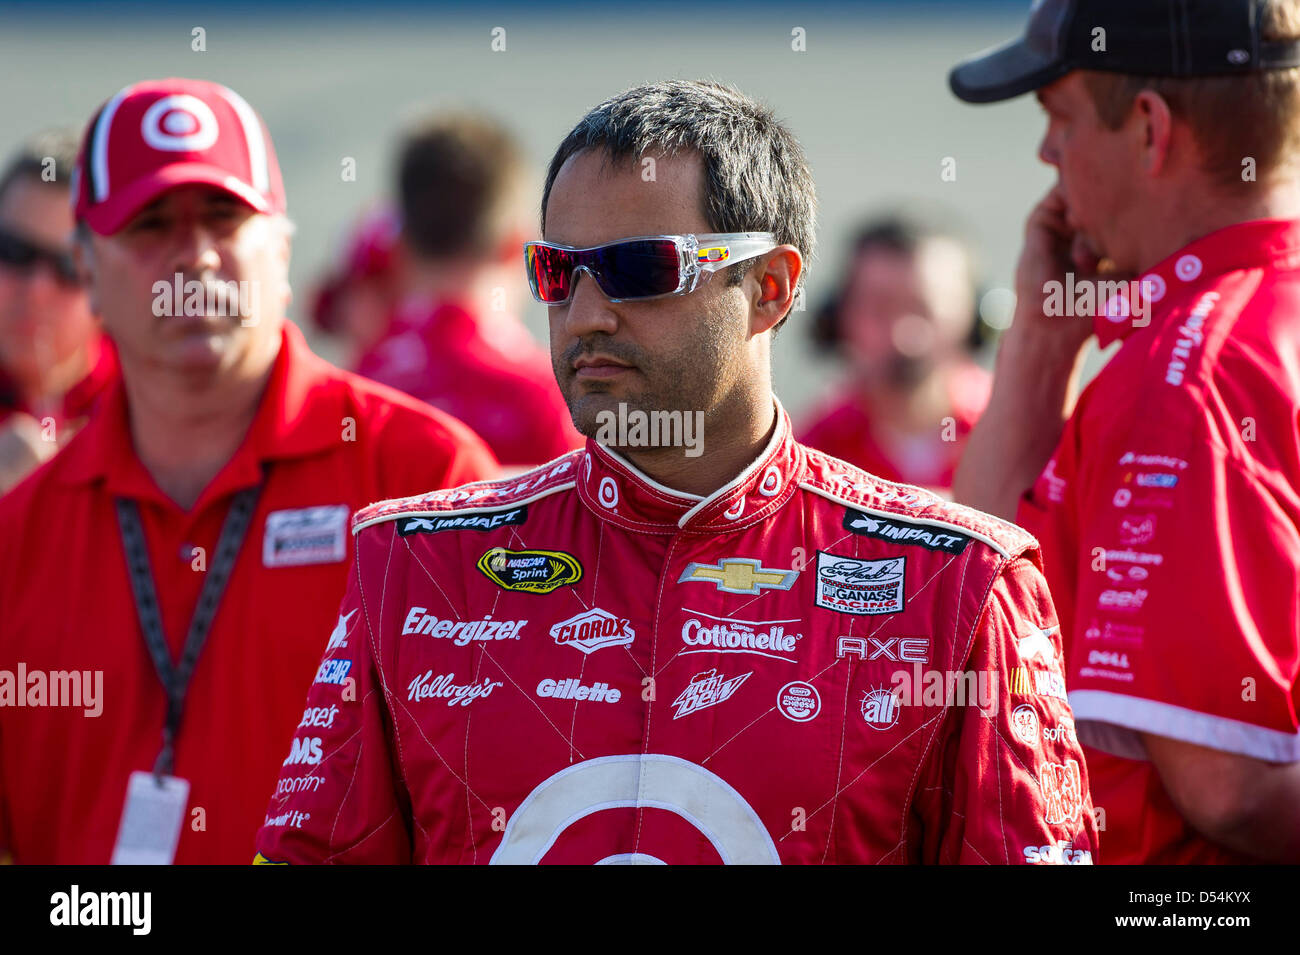 March 22, 2013 - Fontana, CA, U.S. - FONTANA, CA - MAR 22, 2013: Juan Pablo Montoya (42) prepares for a practice session for the Auto Club 400 at Auto Club Speedway in FONTANA, CA. Stock Photo